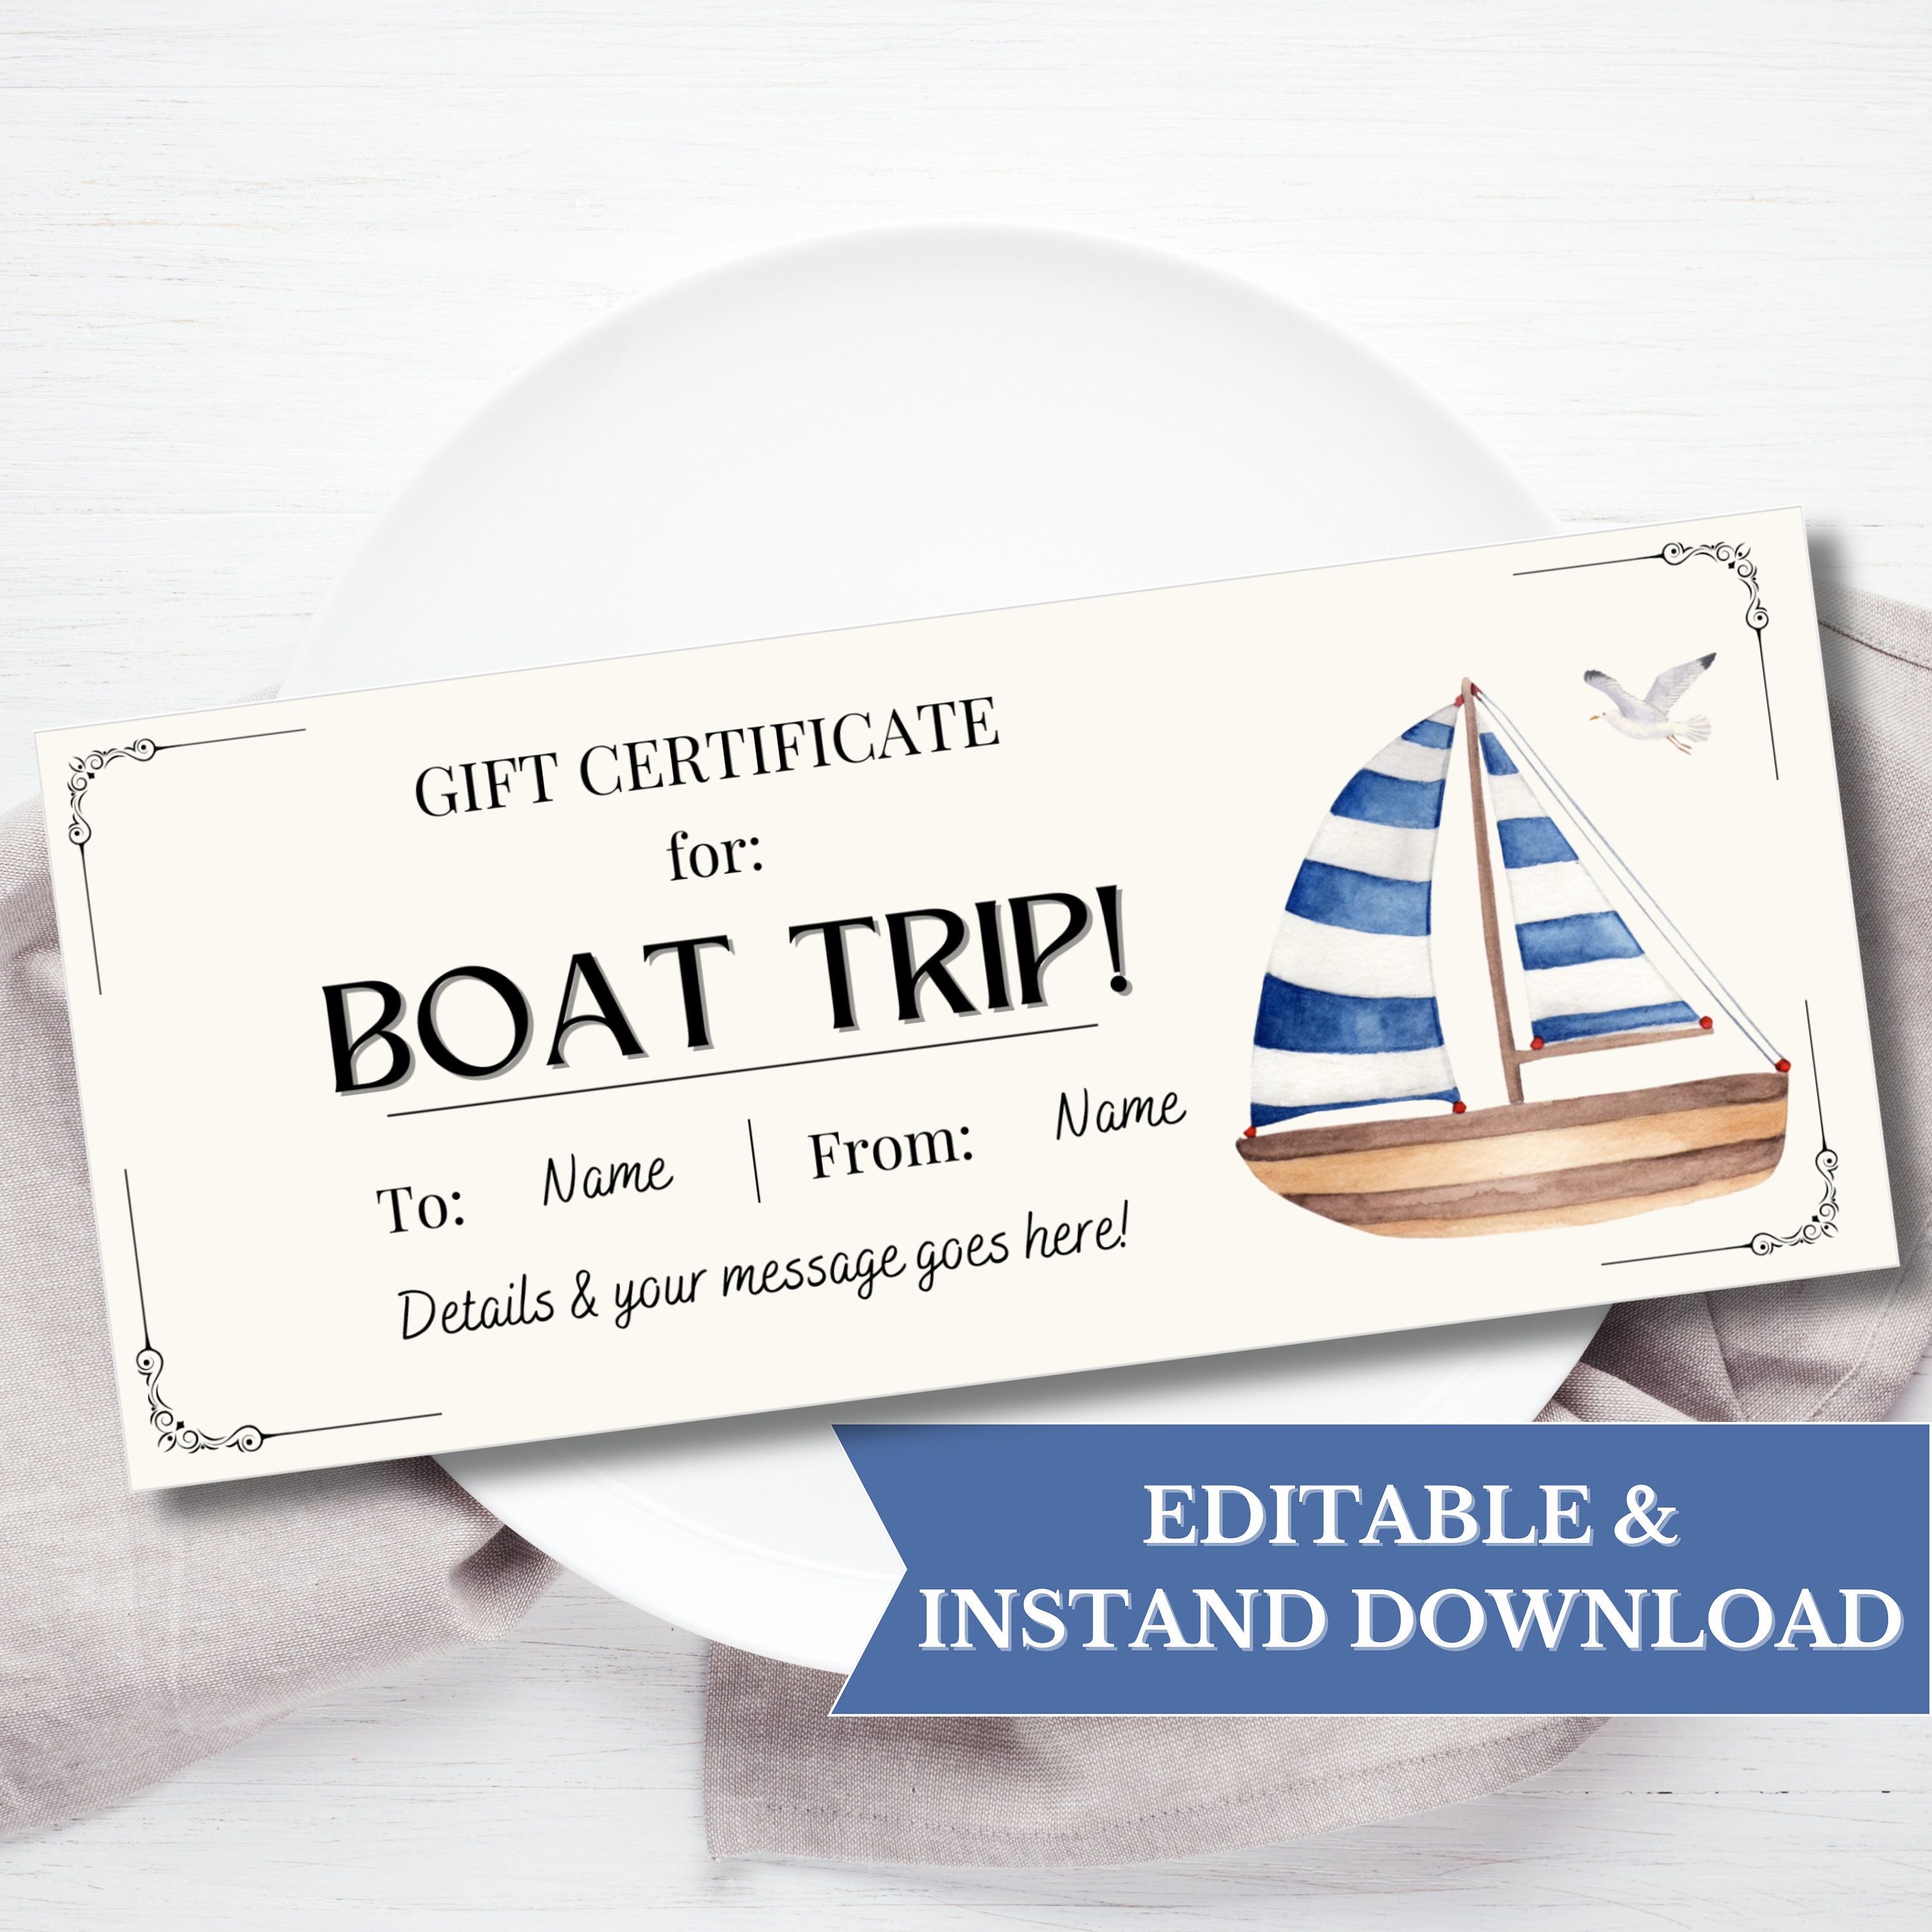 Birthday Boat Trip Voucher Printable, Boat Trip Ticket Template